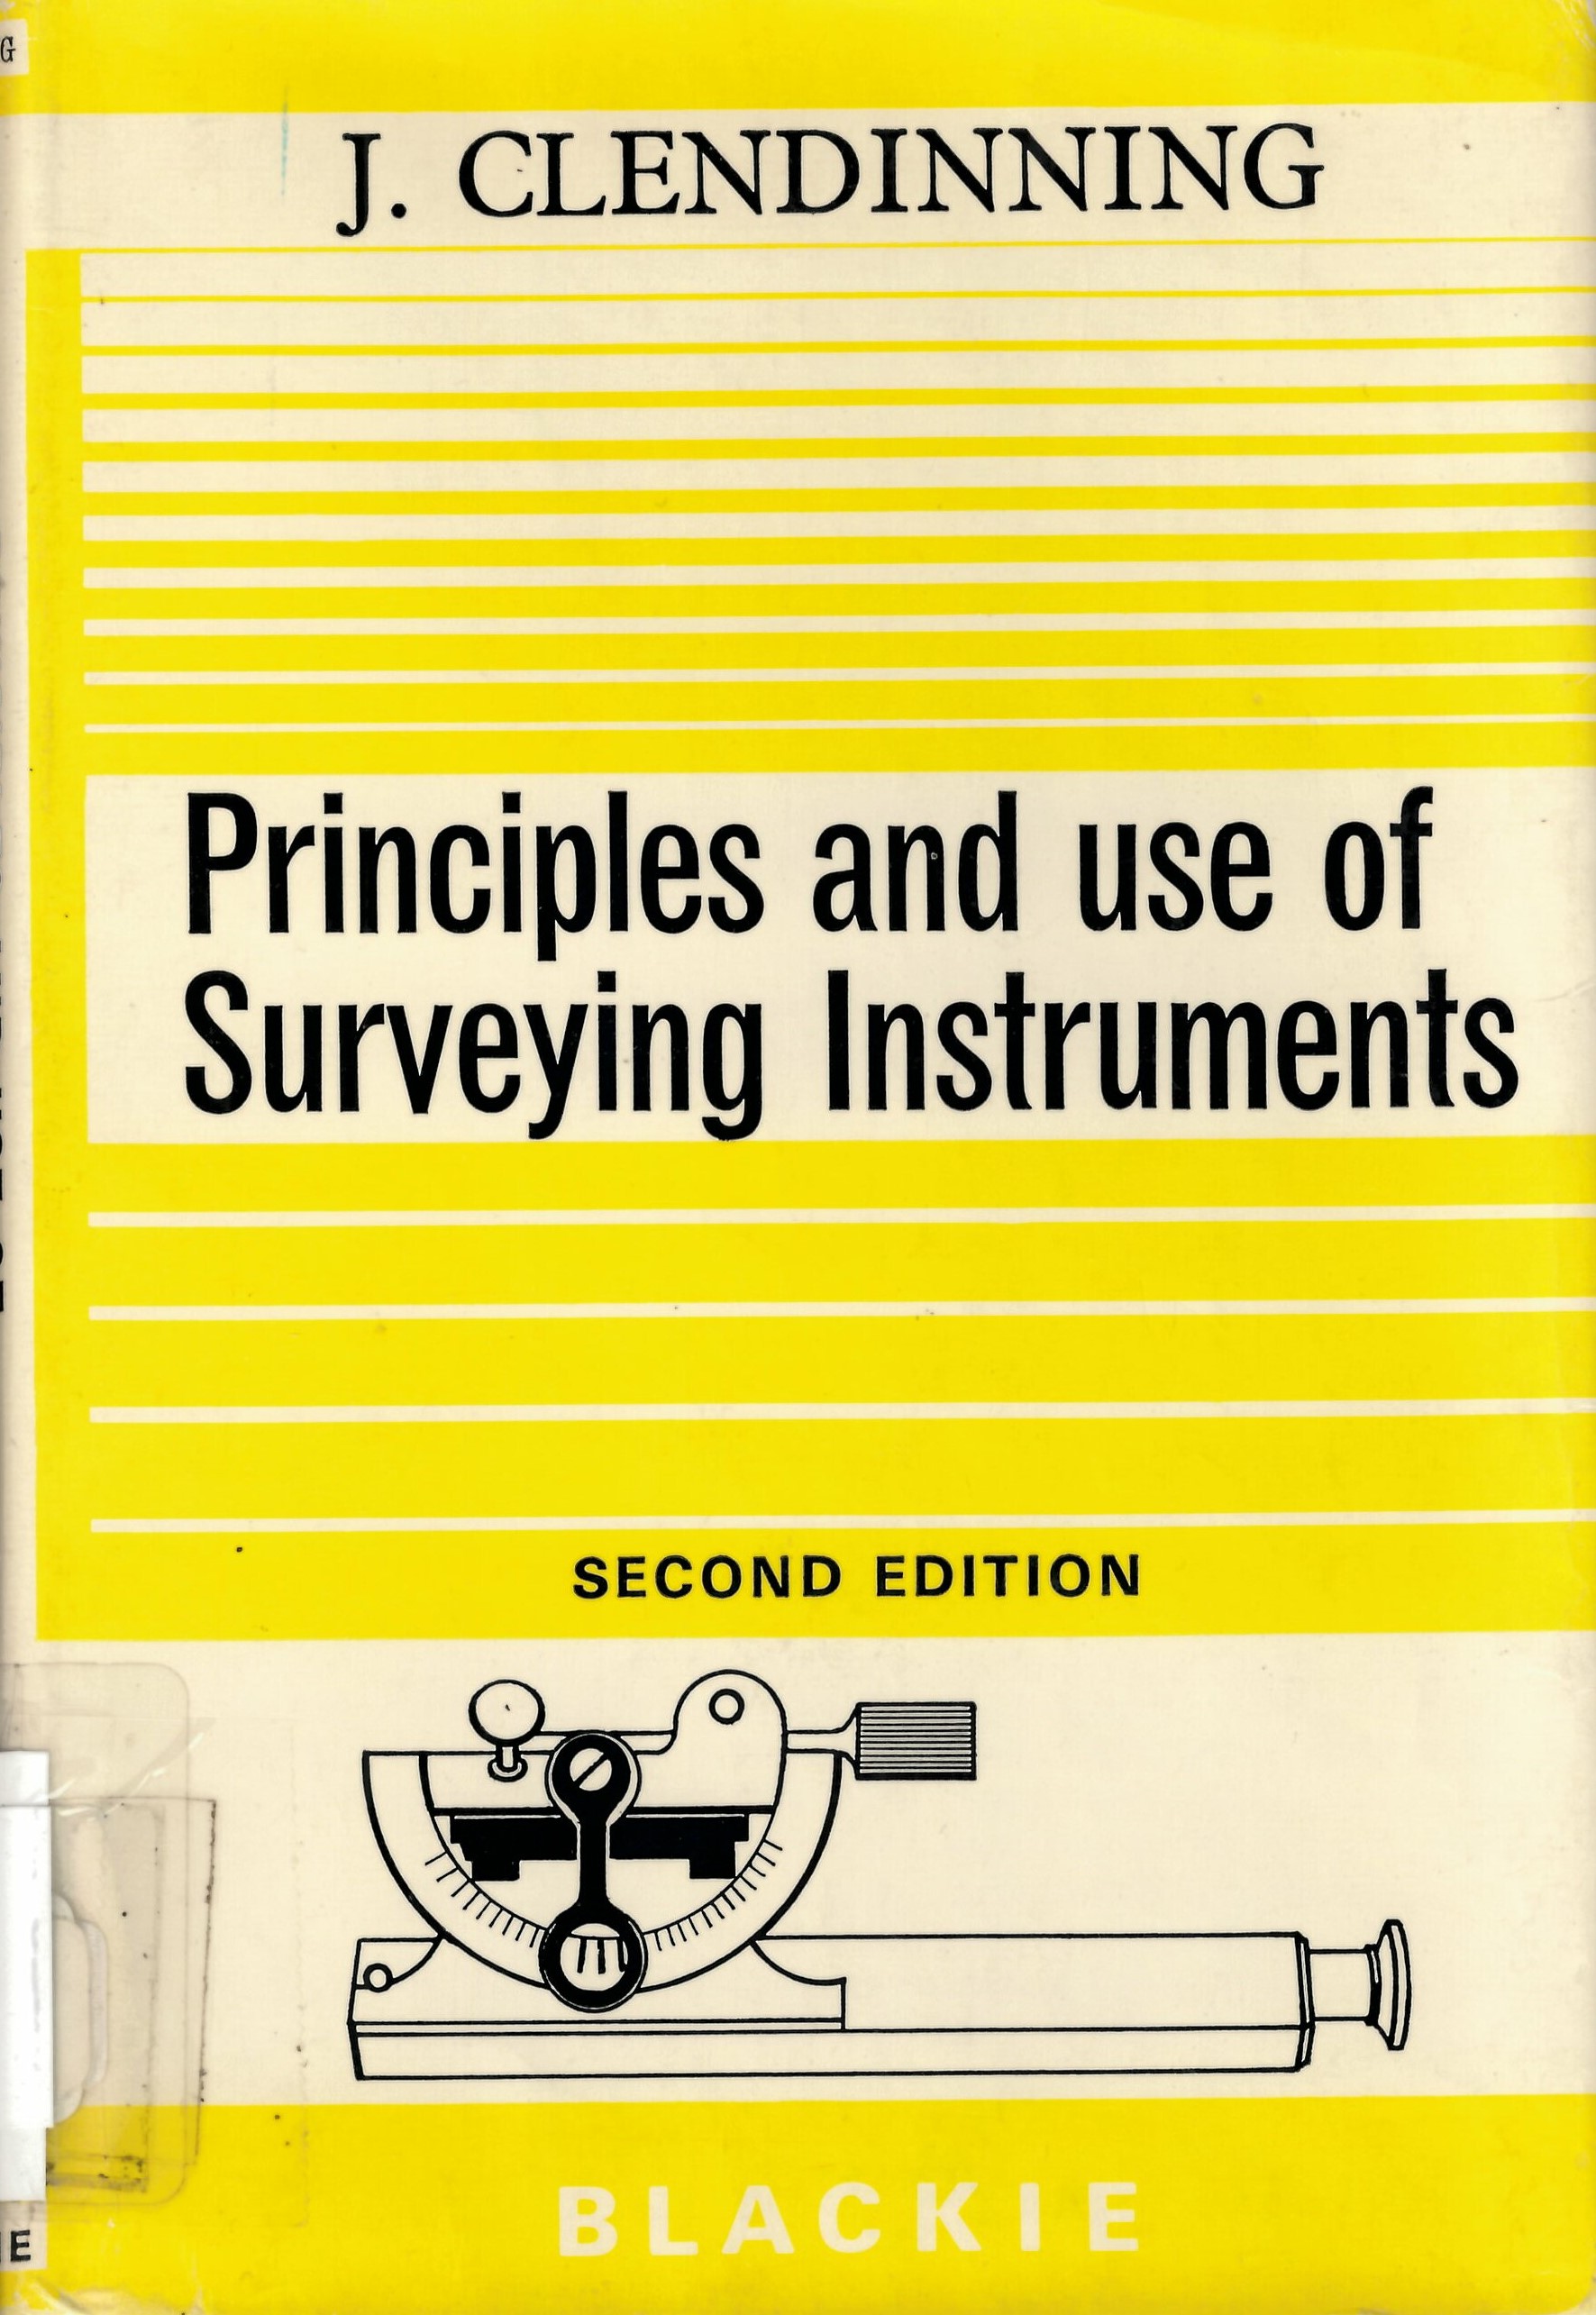 Principles and use of surveying instruments